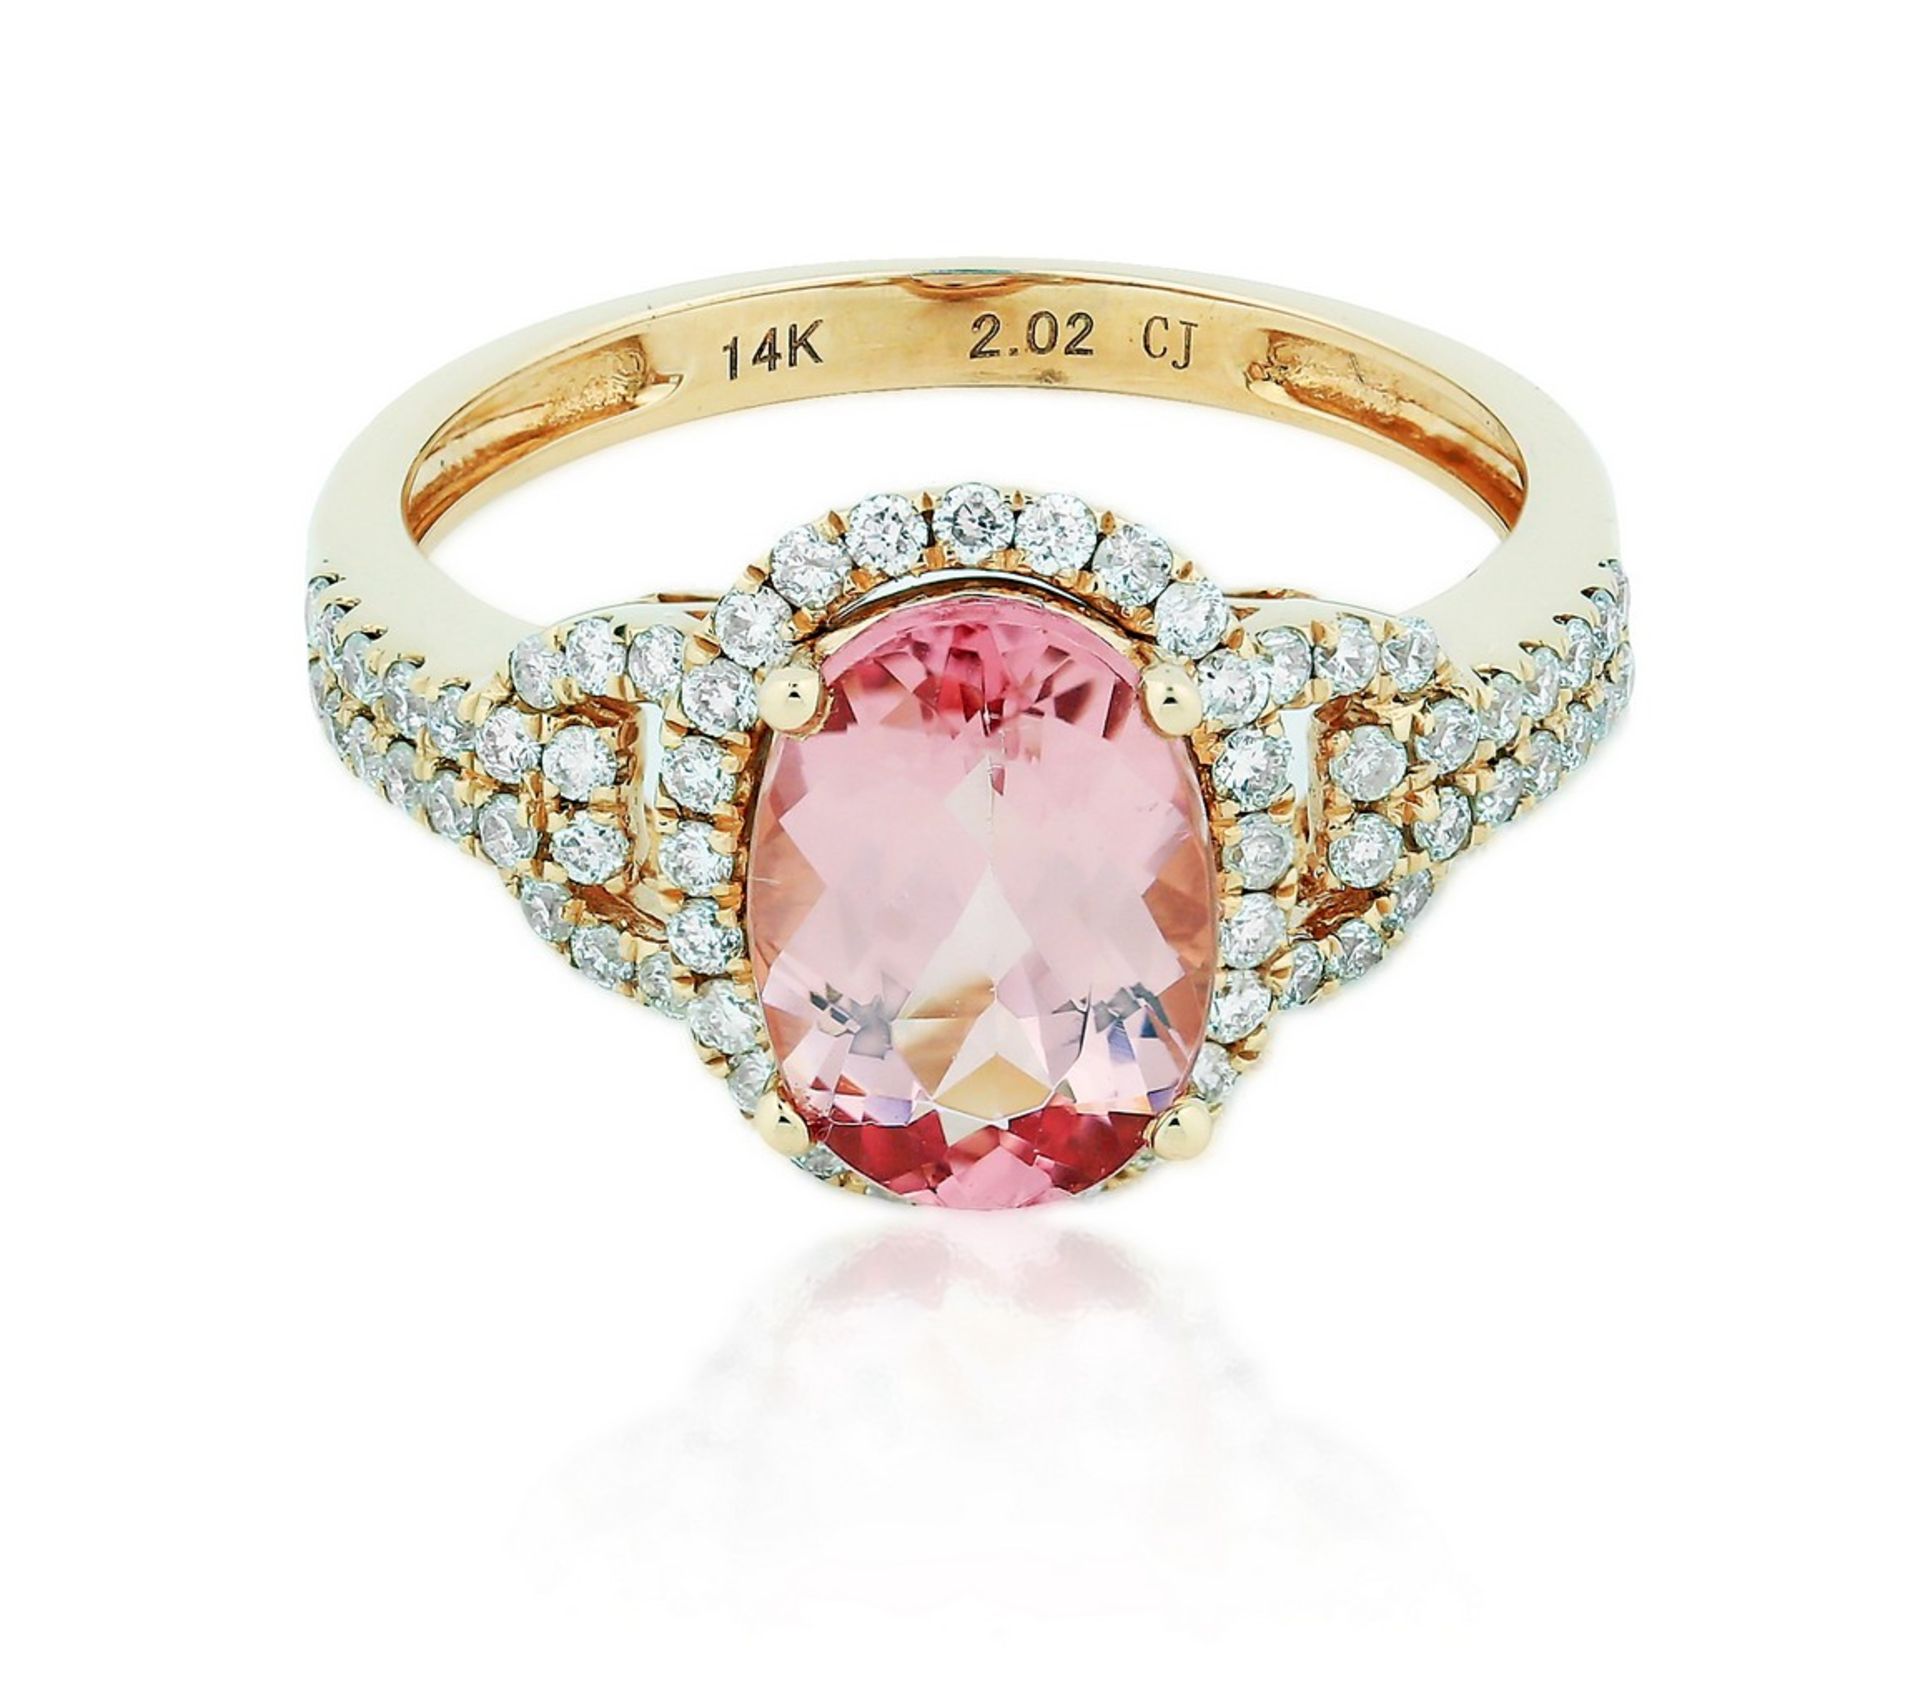 SPINEL AND DIAMOND RING Spinel and Diamond Ring Centering an oval-cut pink spinel weighing